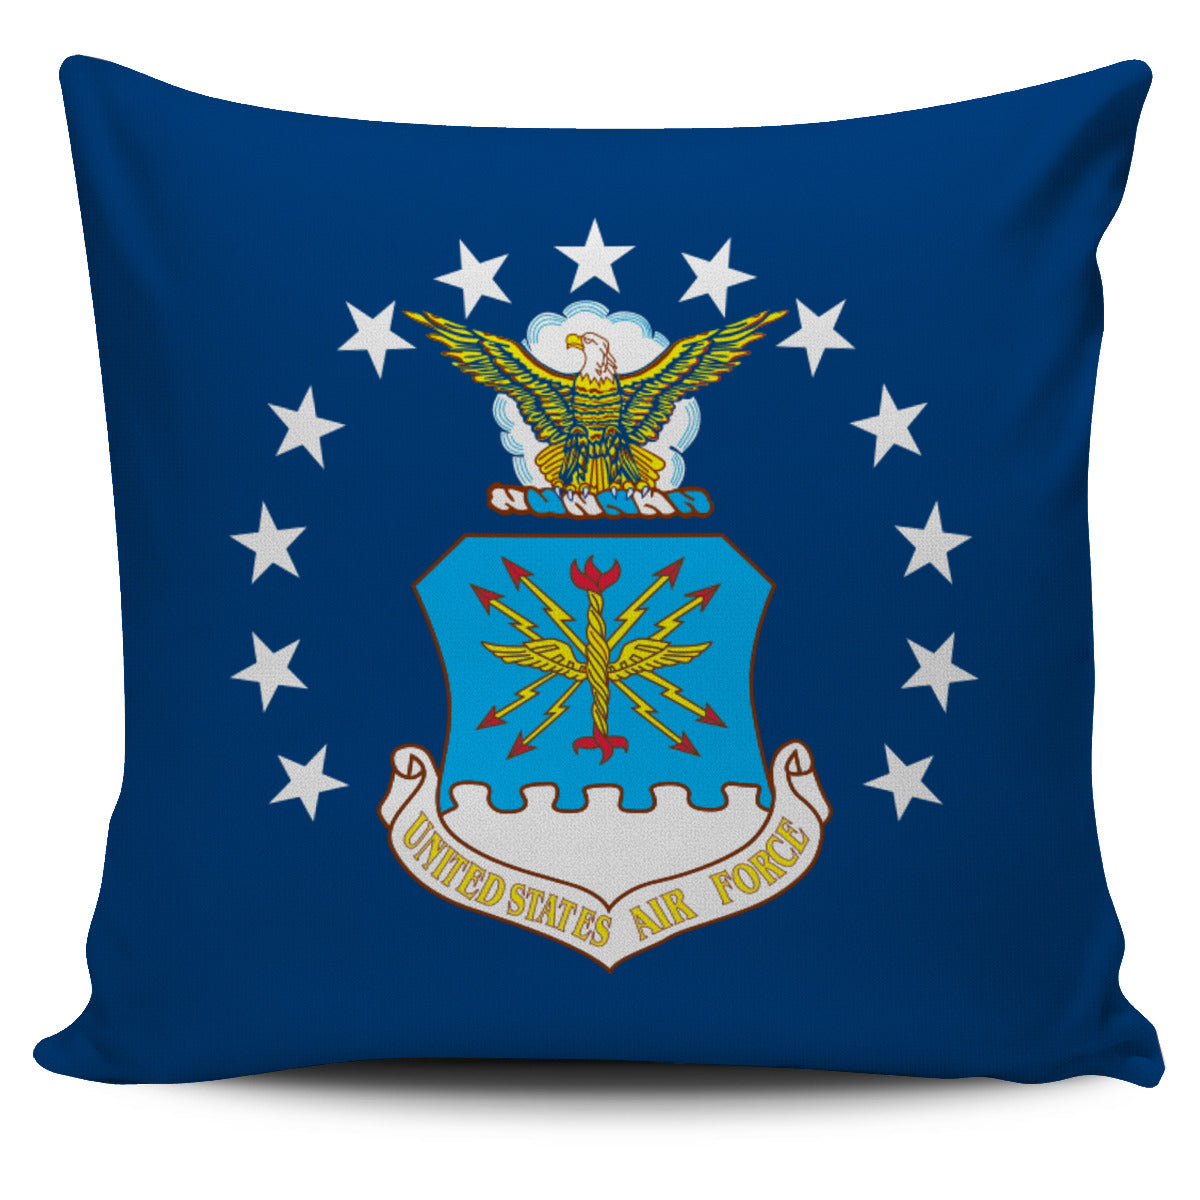 FREE Air Force Pillow